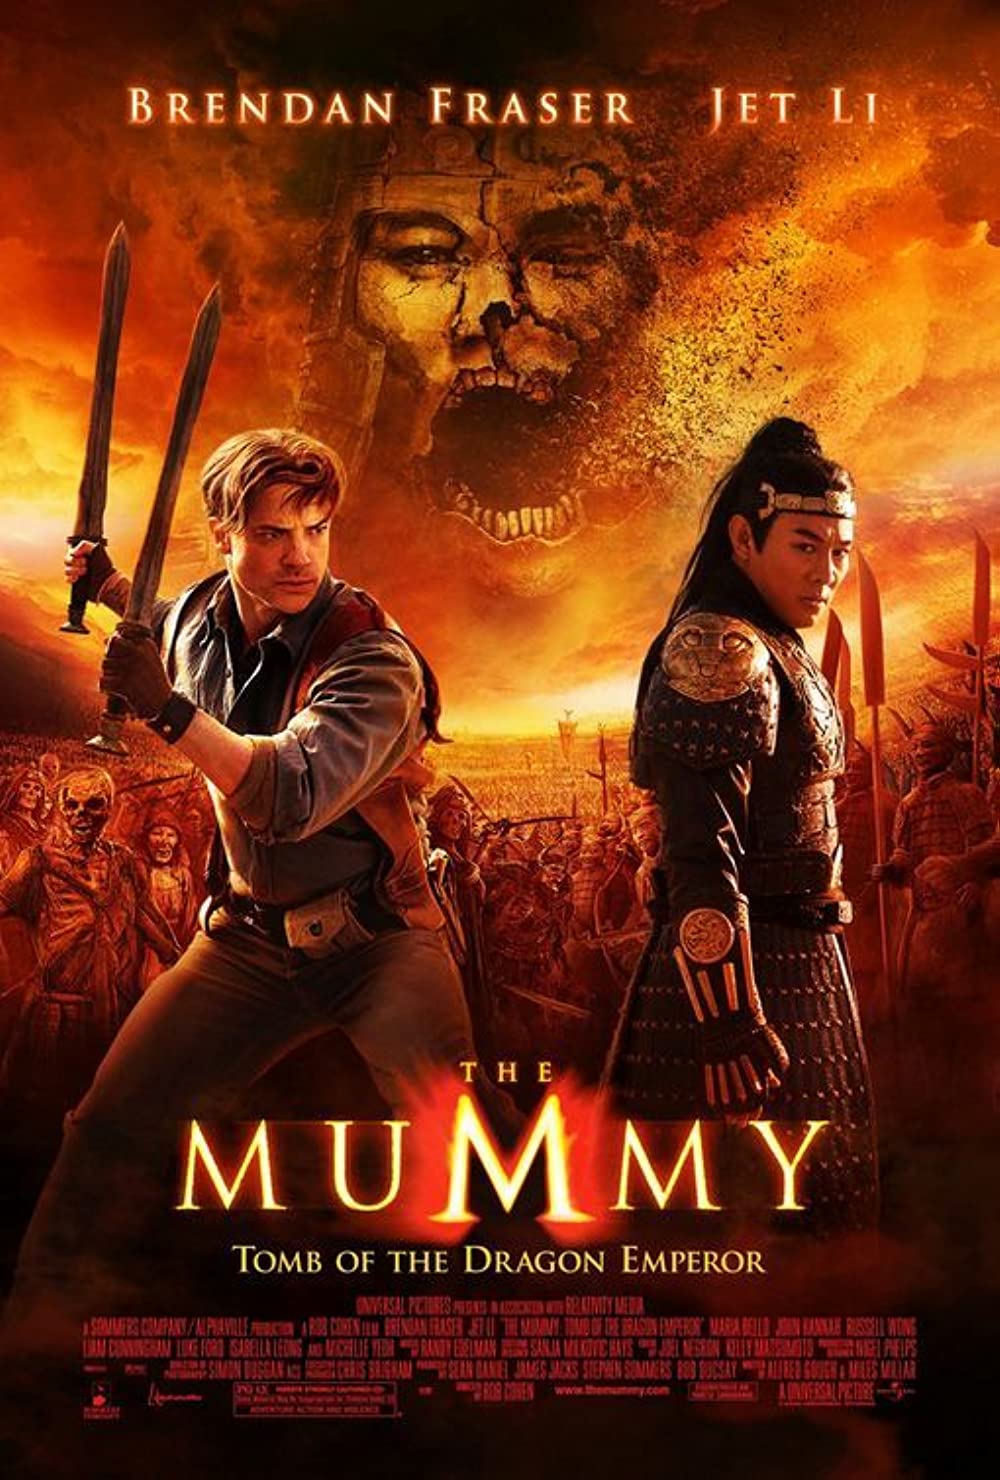 FULL MOVIE: The Mummy: Tomb Of The Dragon Emperor (2009) [Action]